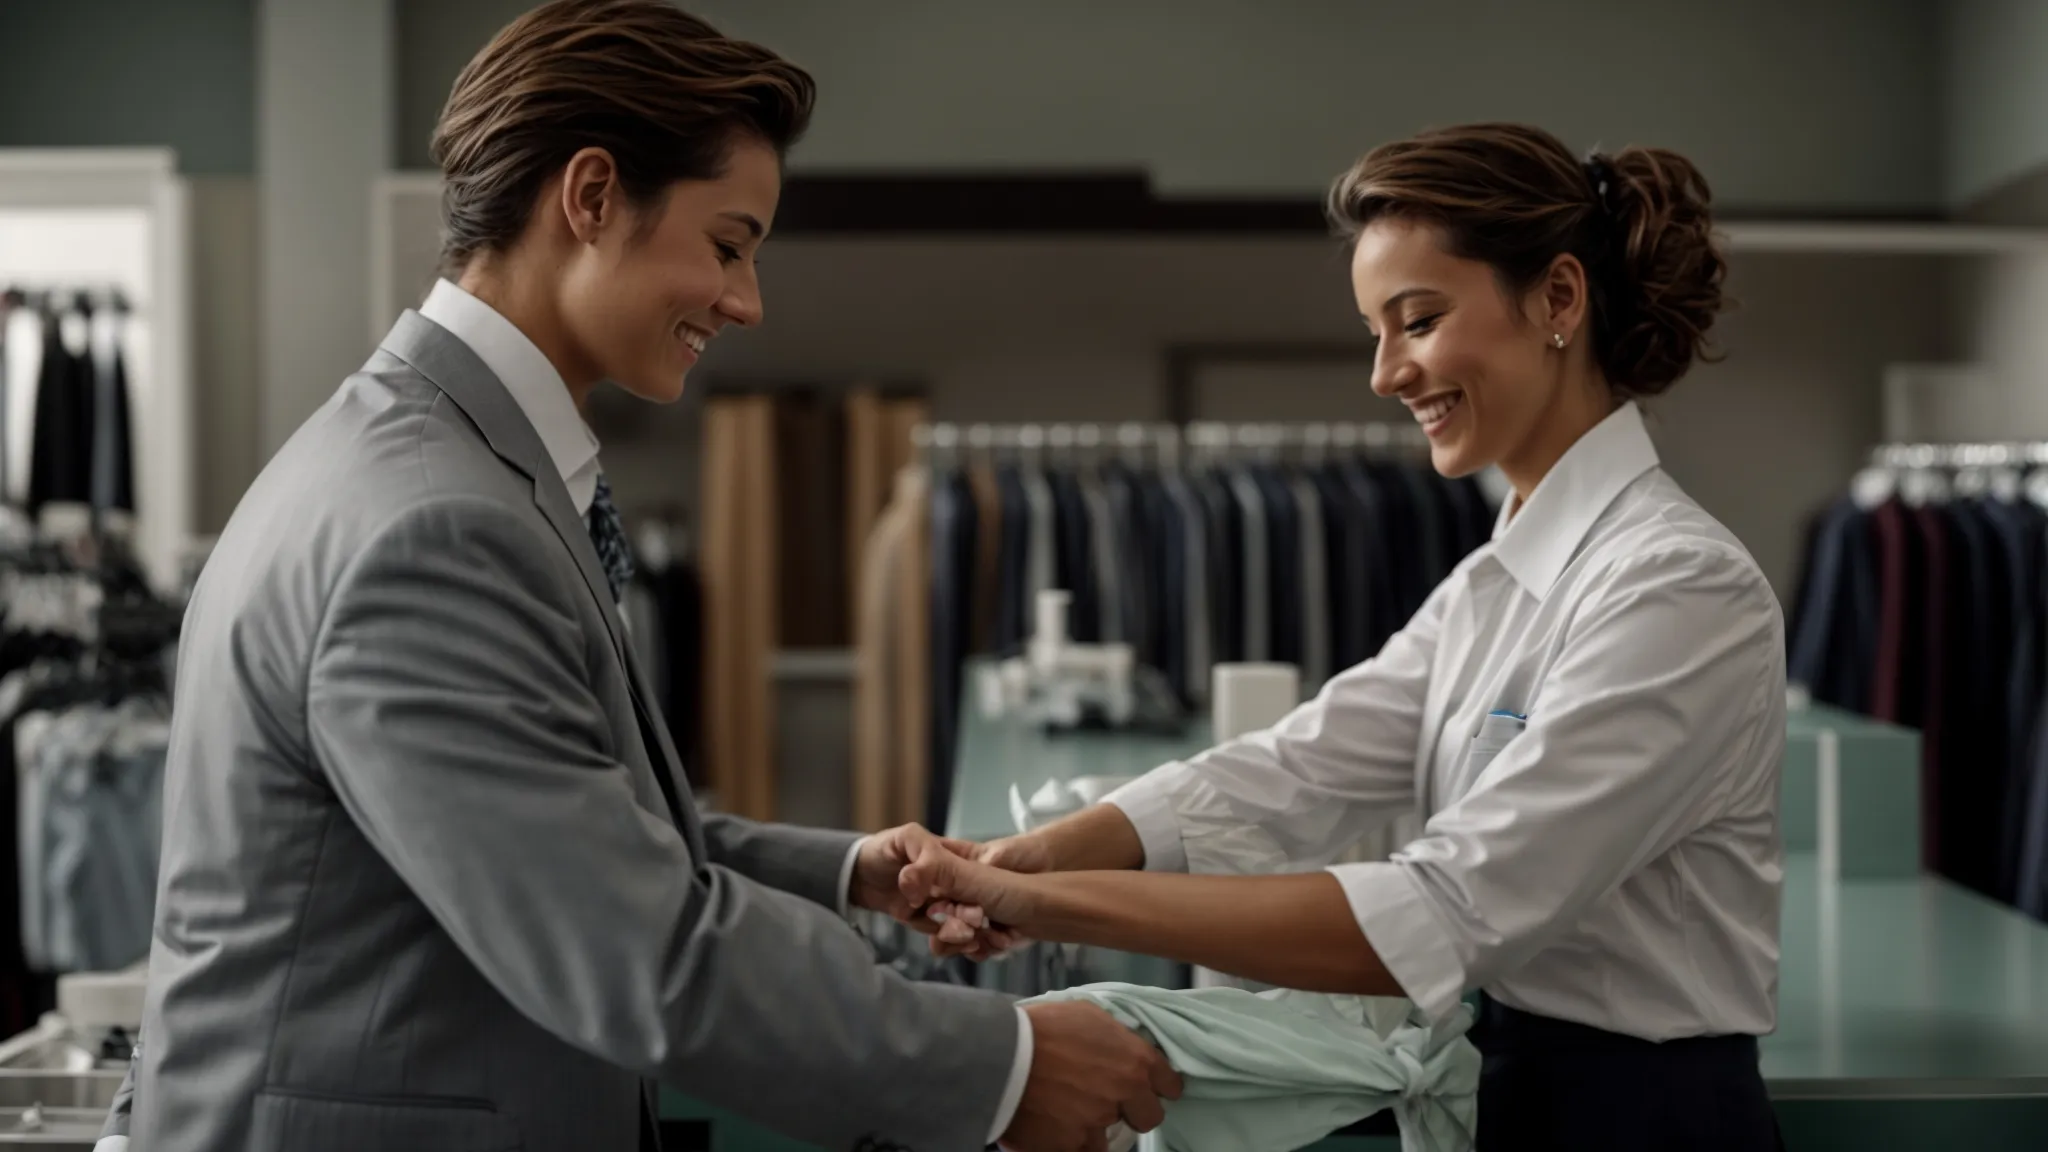 a smiling employee handing a freshly pressed suit to a satisfied customer at the counter of a clean, bright dry cleaning shop.